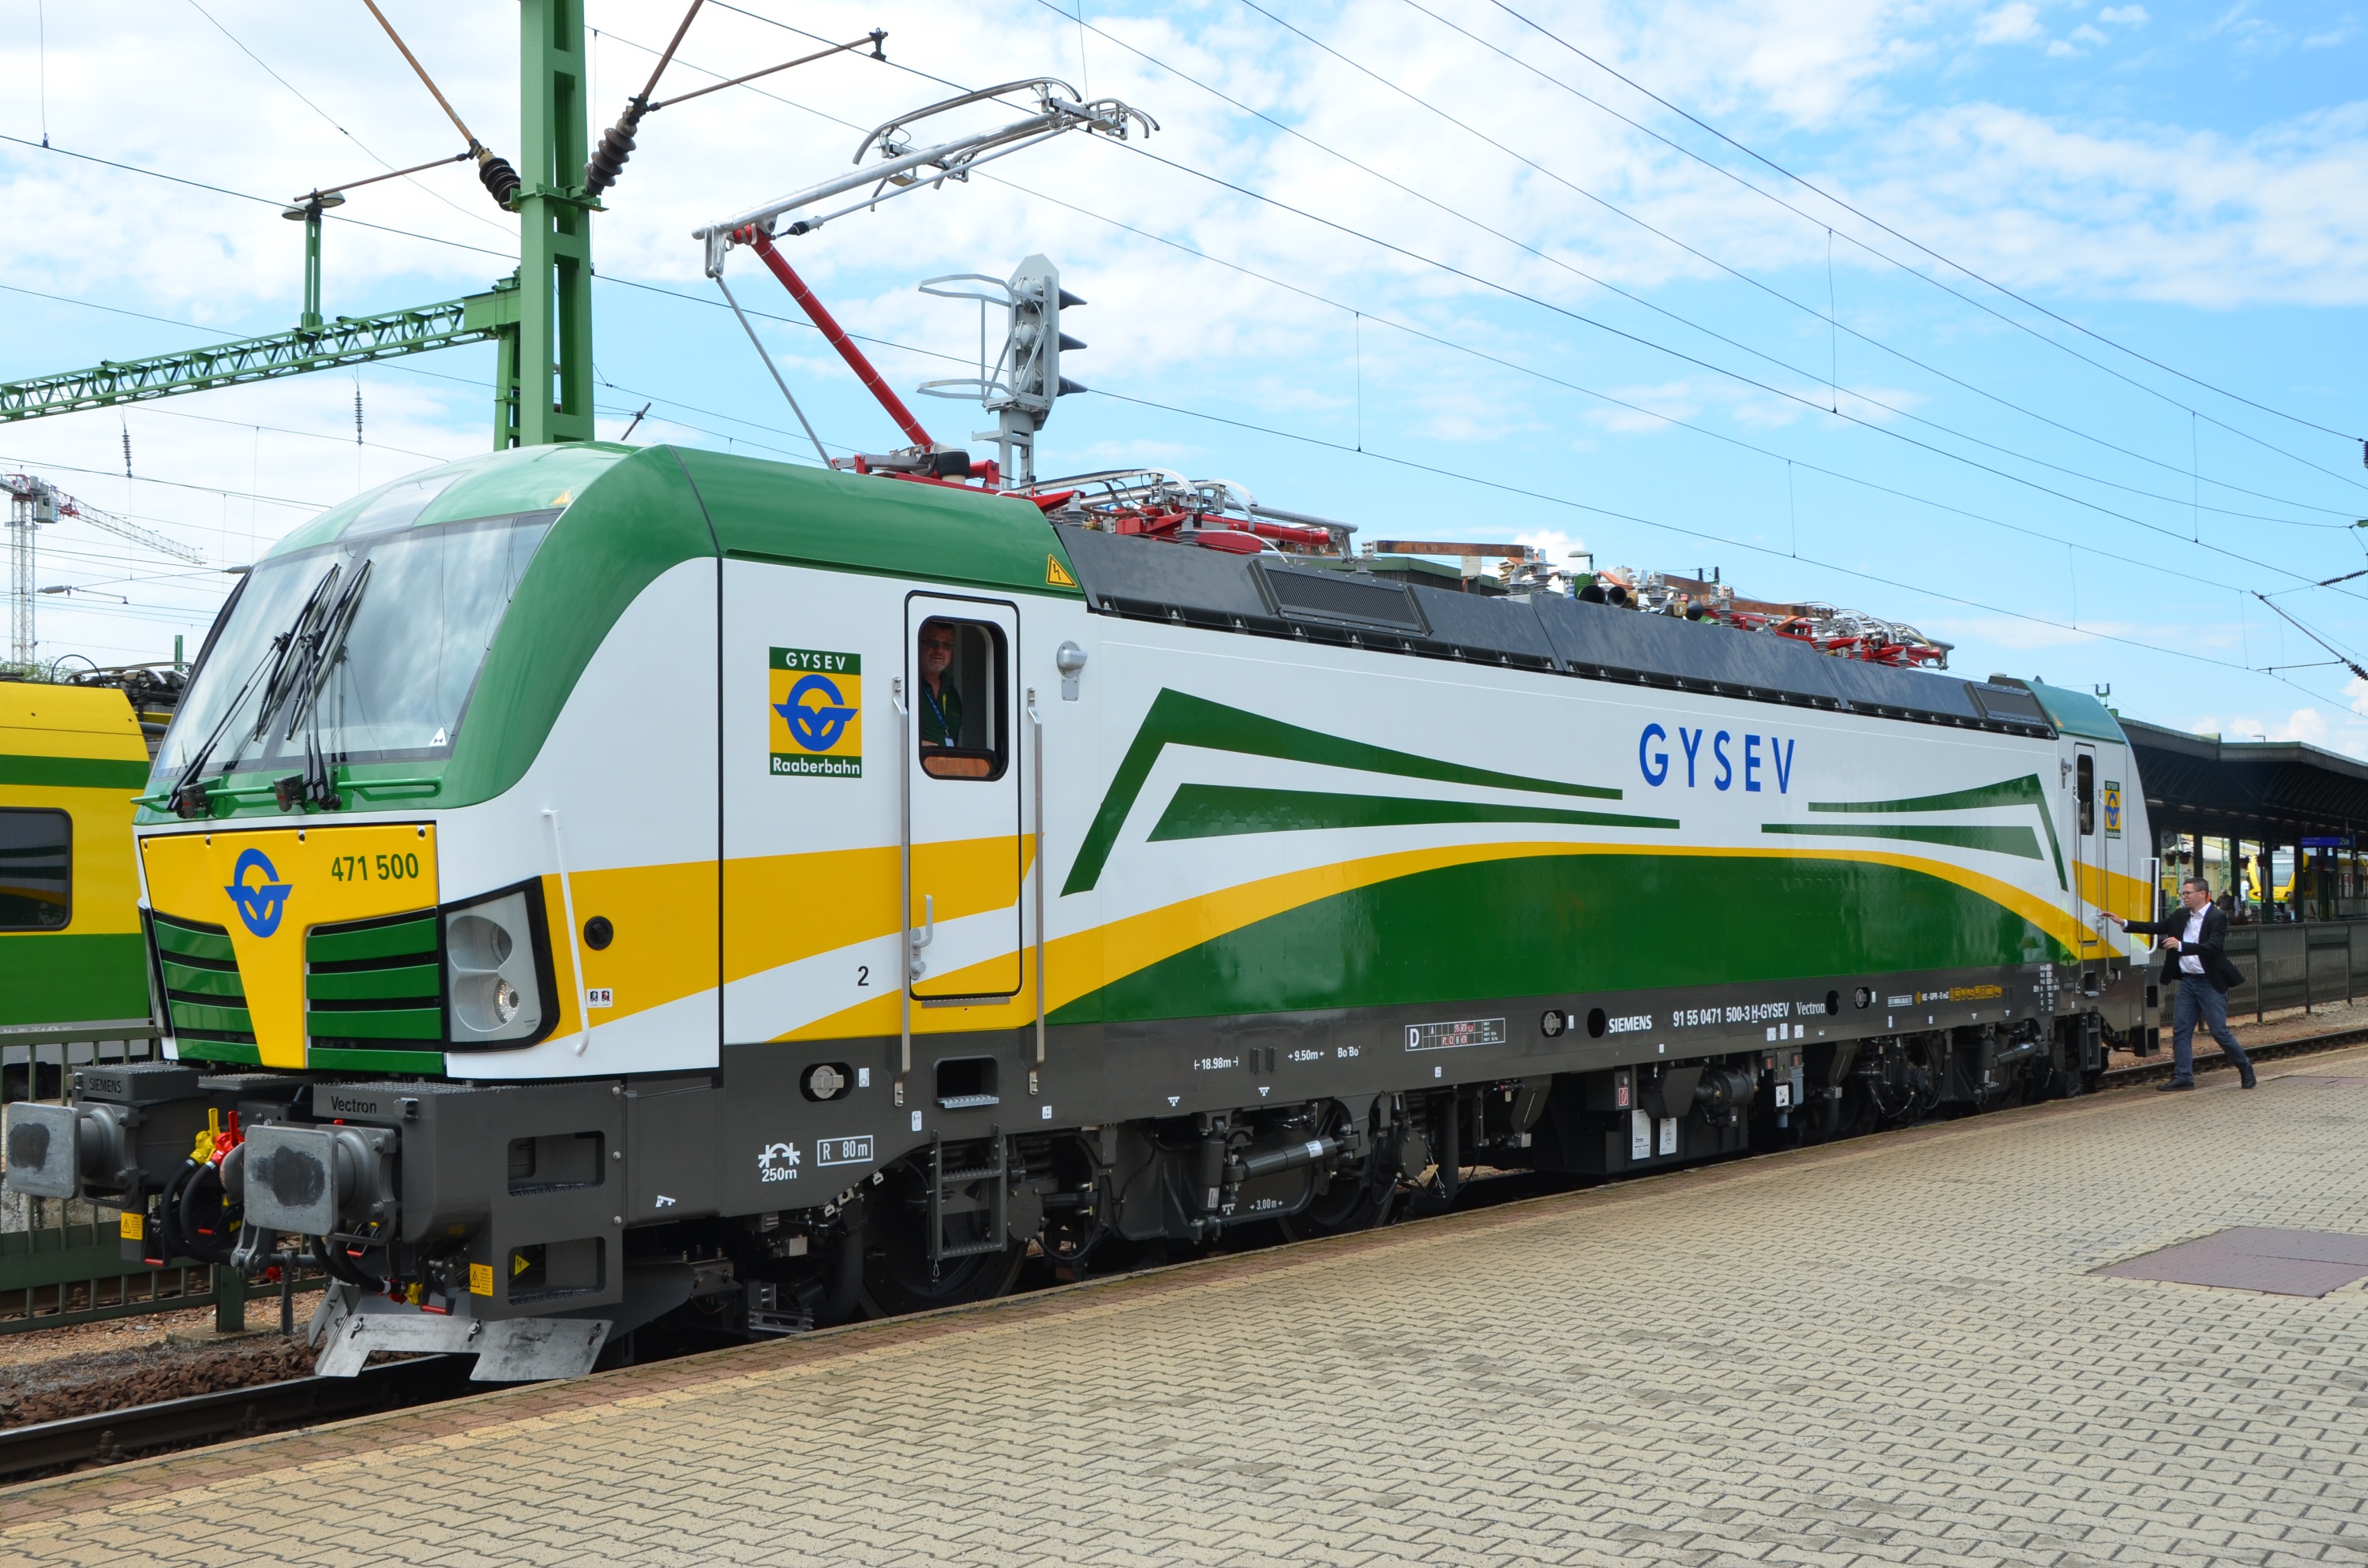 GYSEV takes over the first two of Siemens Vectron locomotives